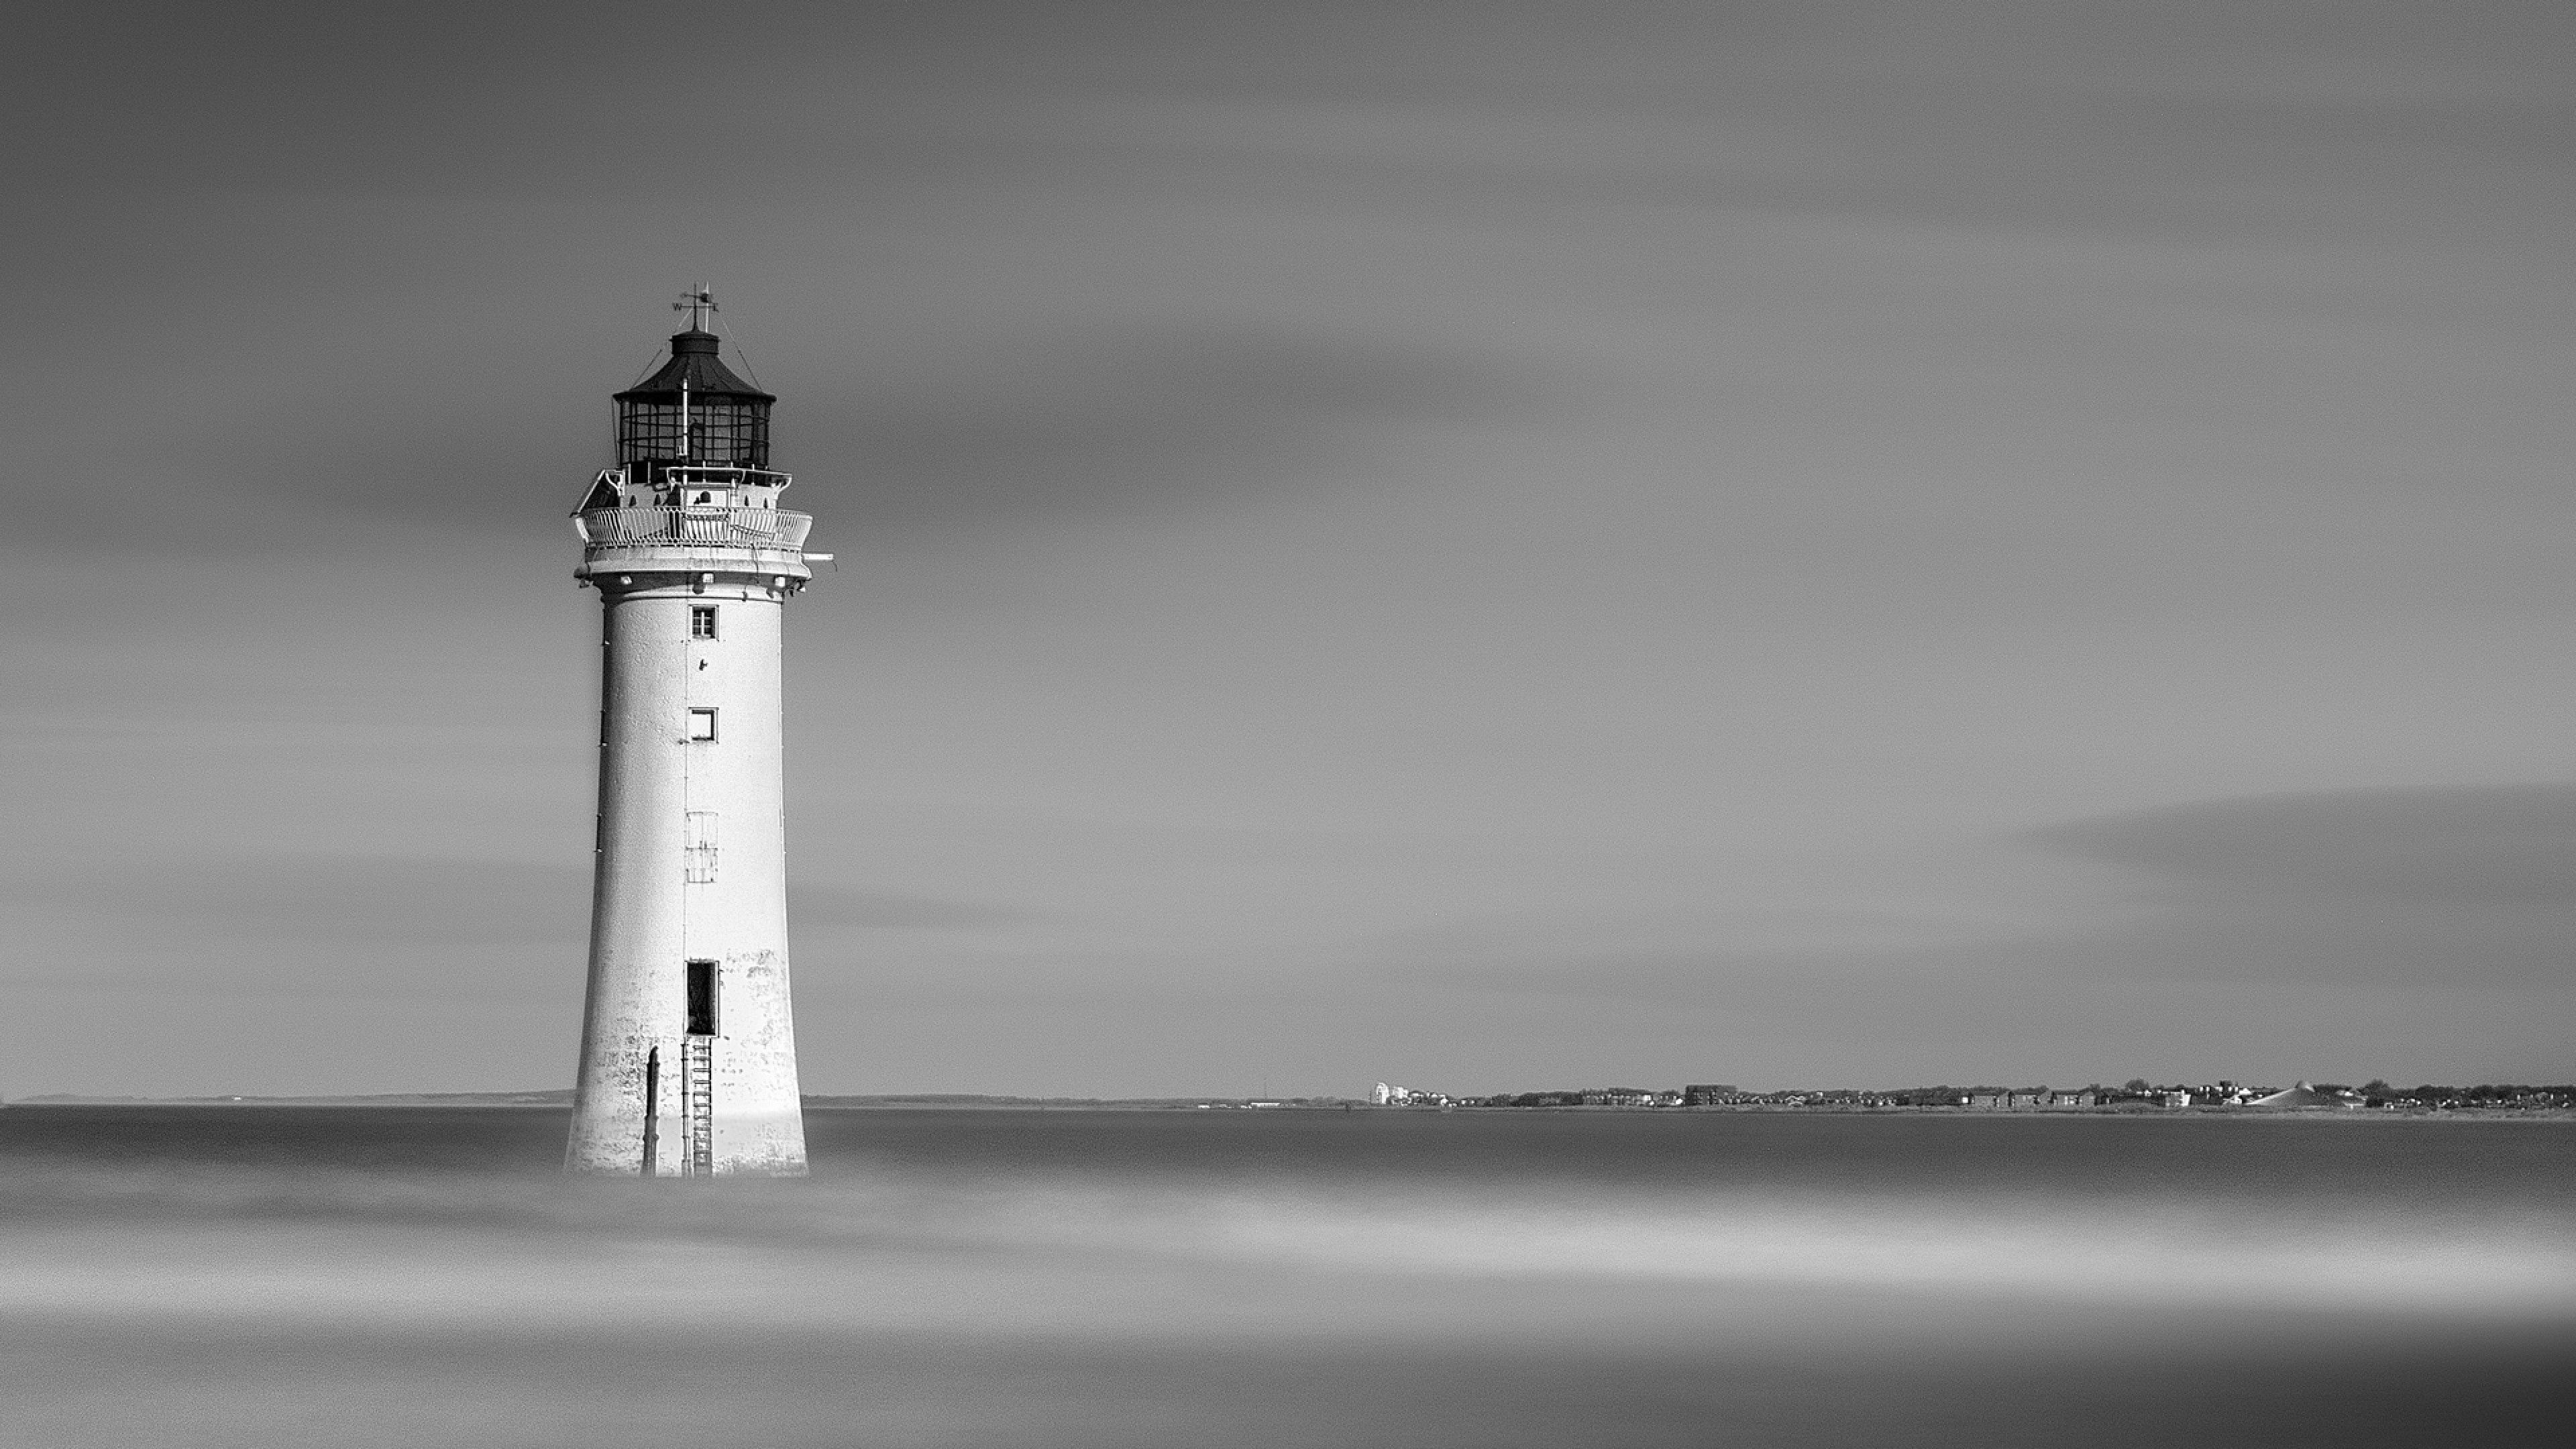 Lighthouse in the ocean HD Wallpaper available in different dimensions 4K Ultra HD